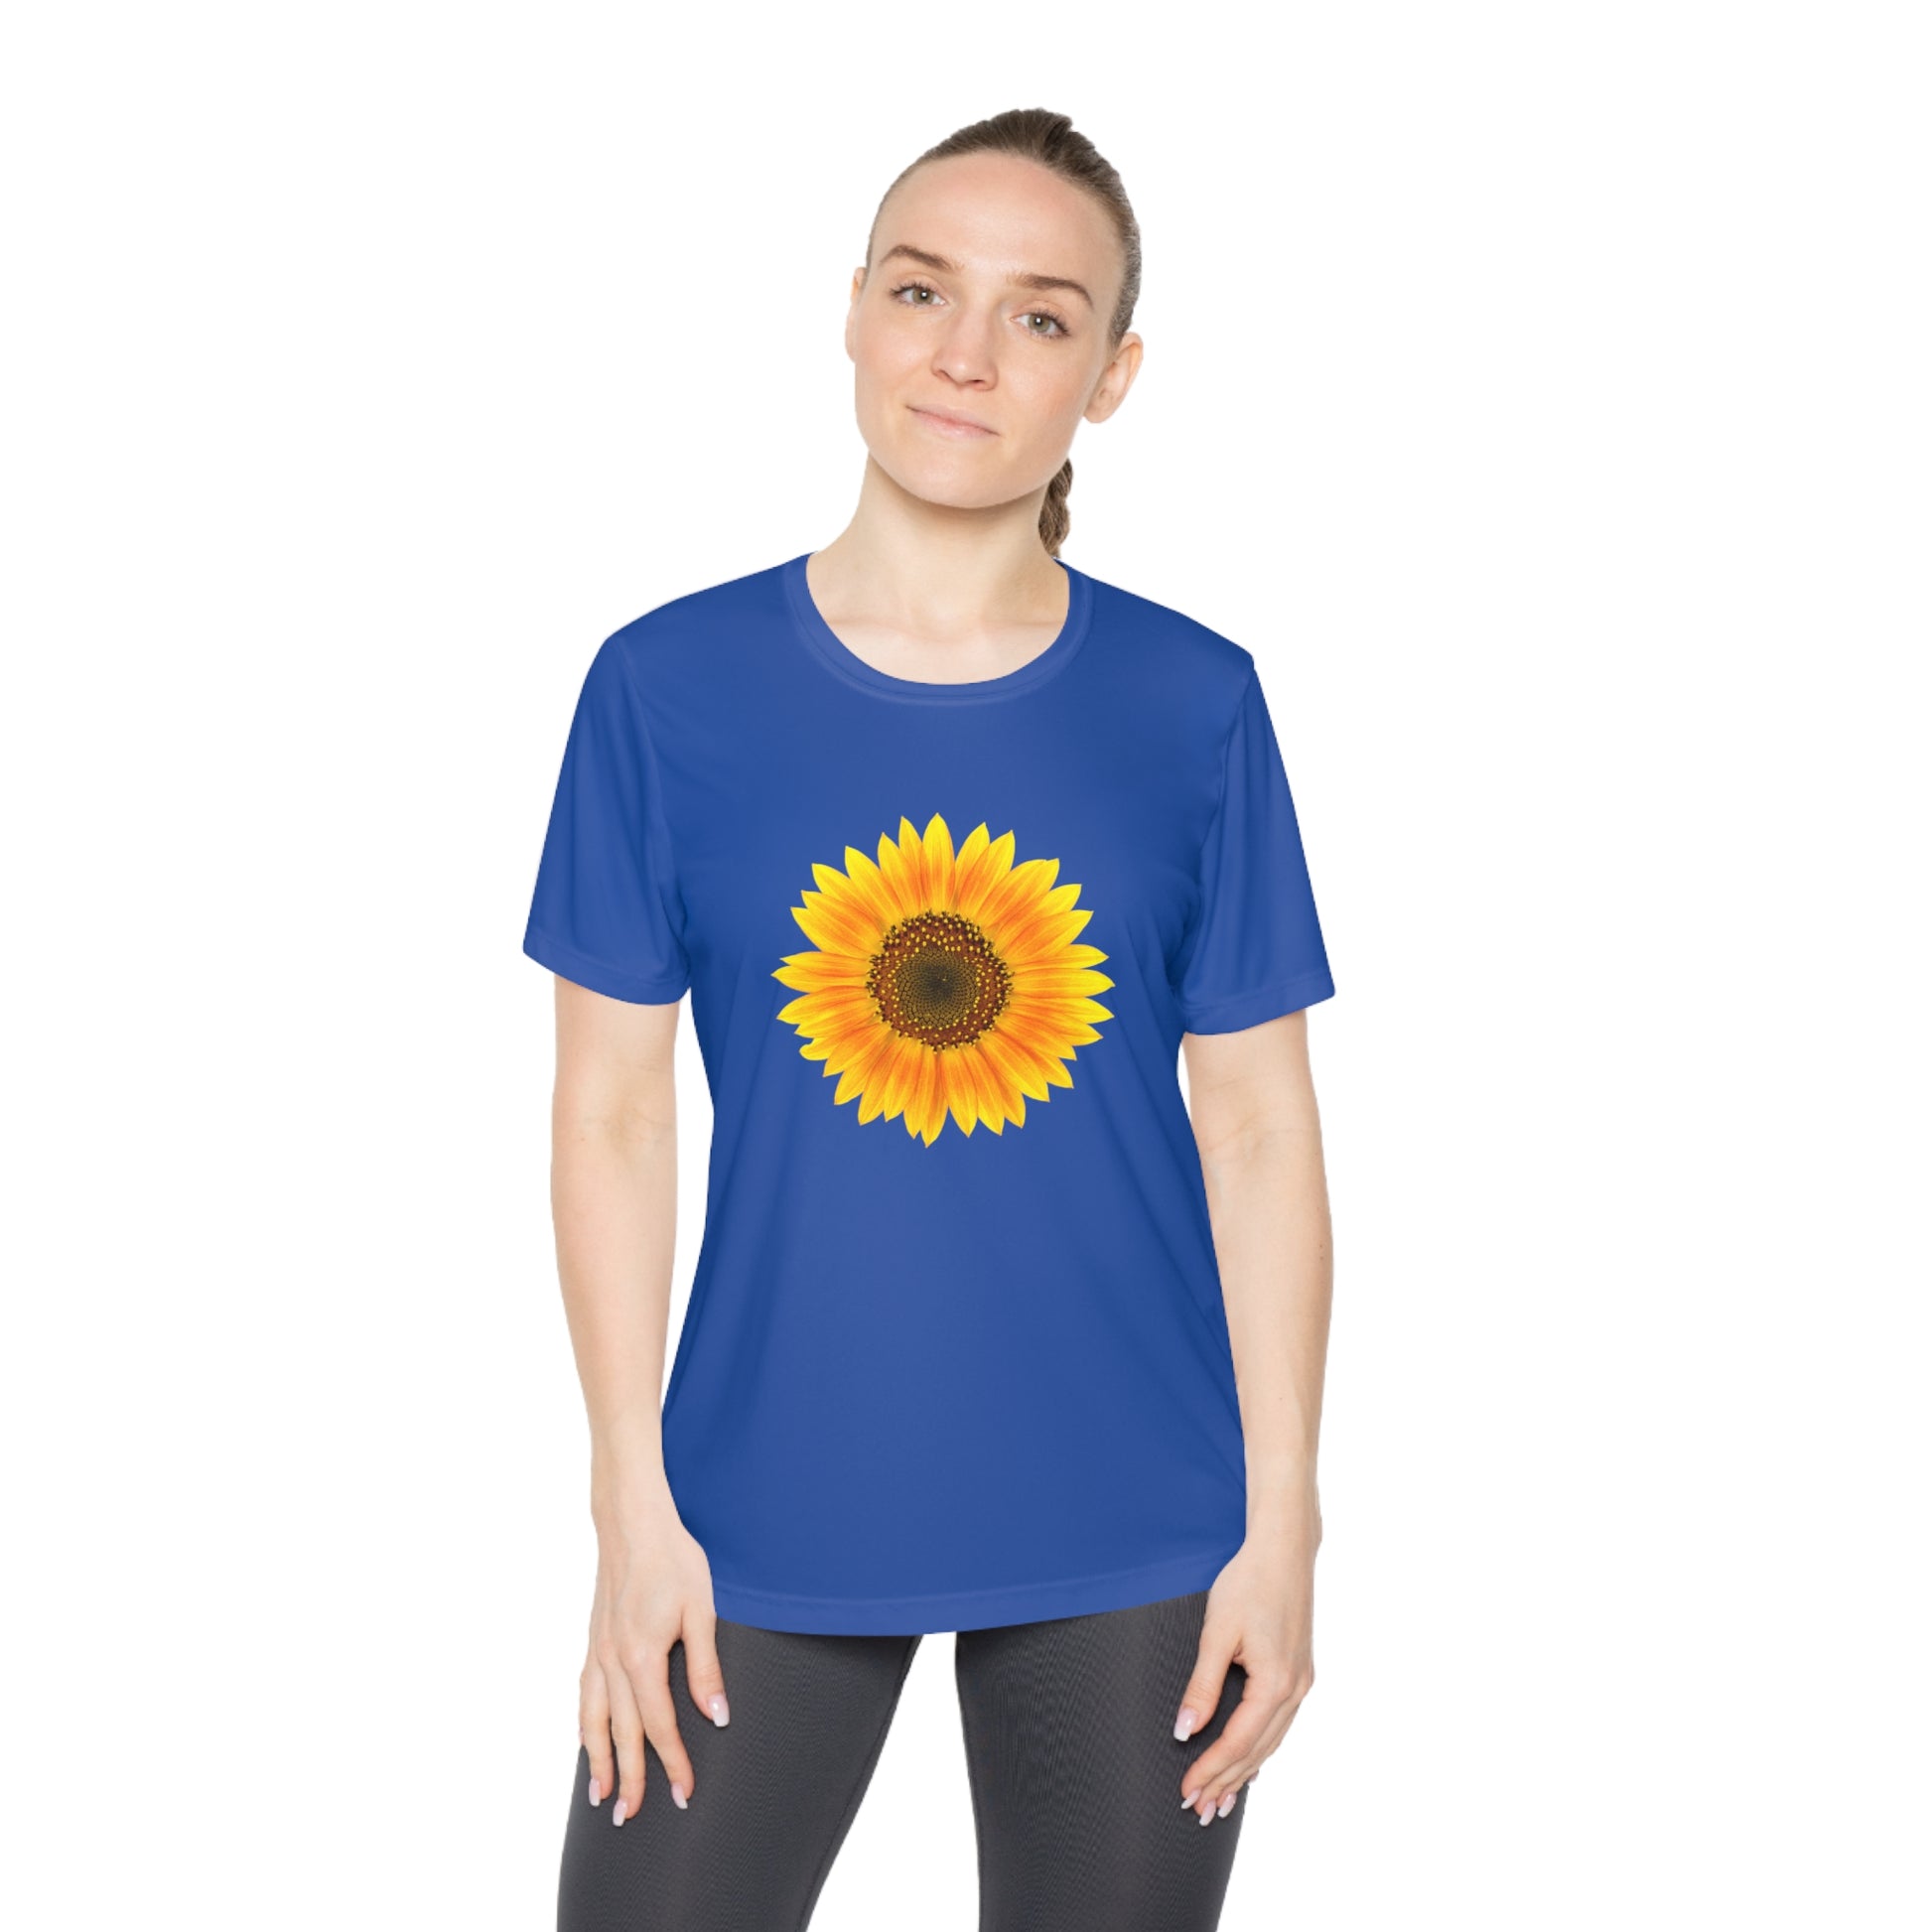 Mock up of a woman wearing the True Royal shirt